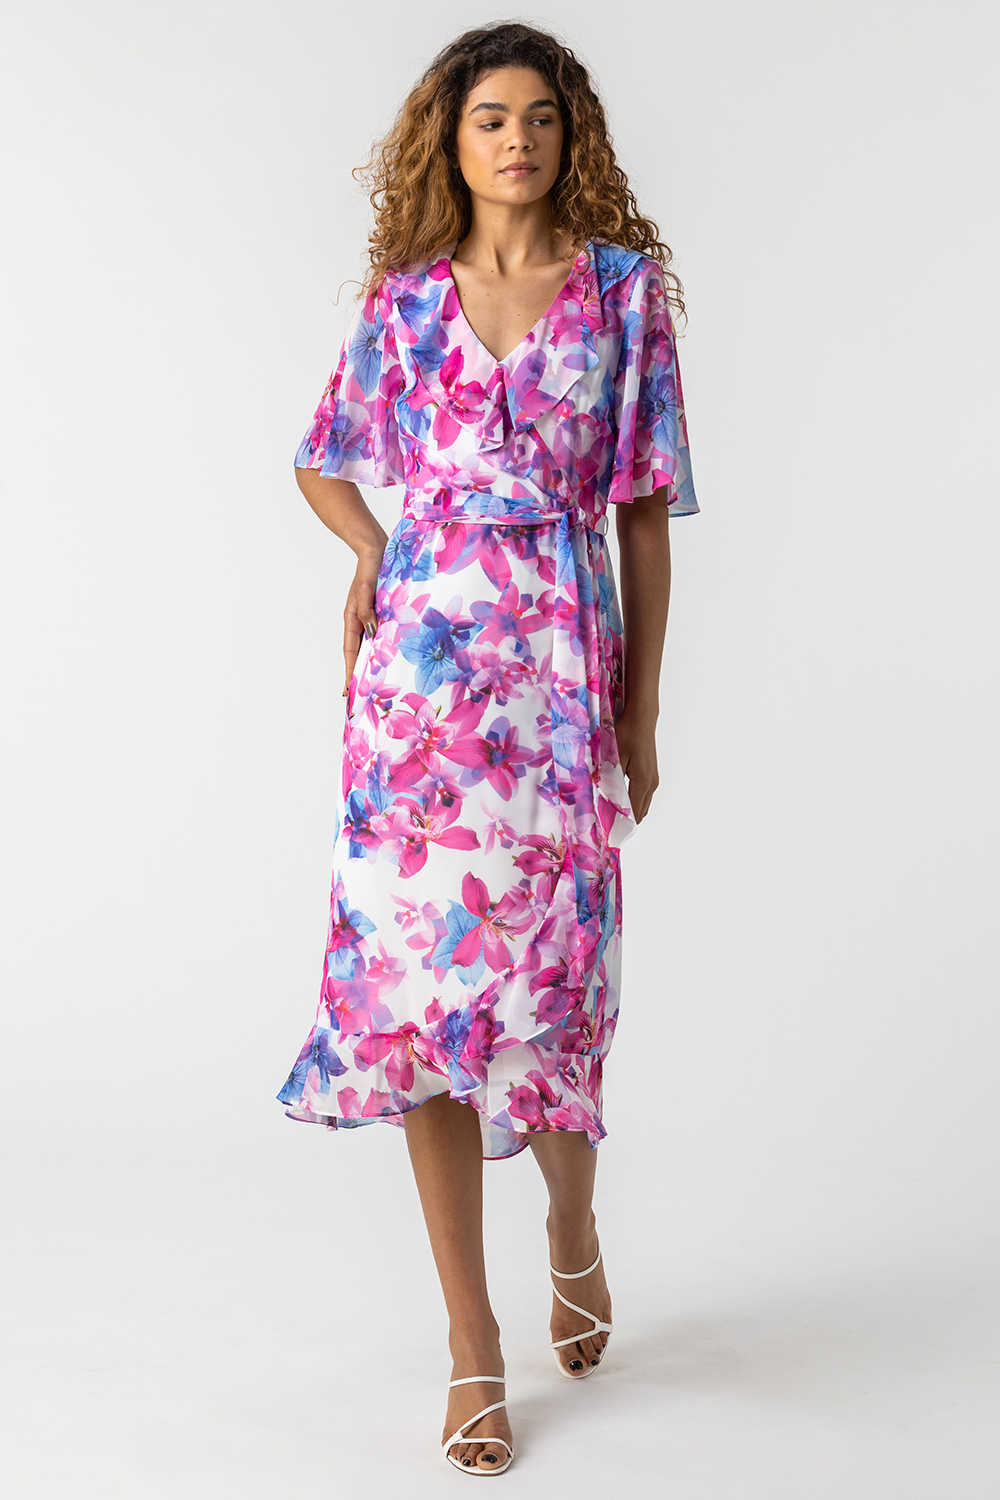 PINK Floral Print Frill Wrap Dress, Image 5 of 5